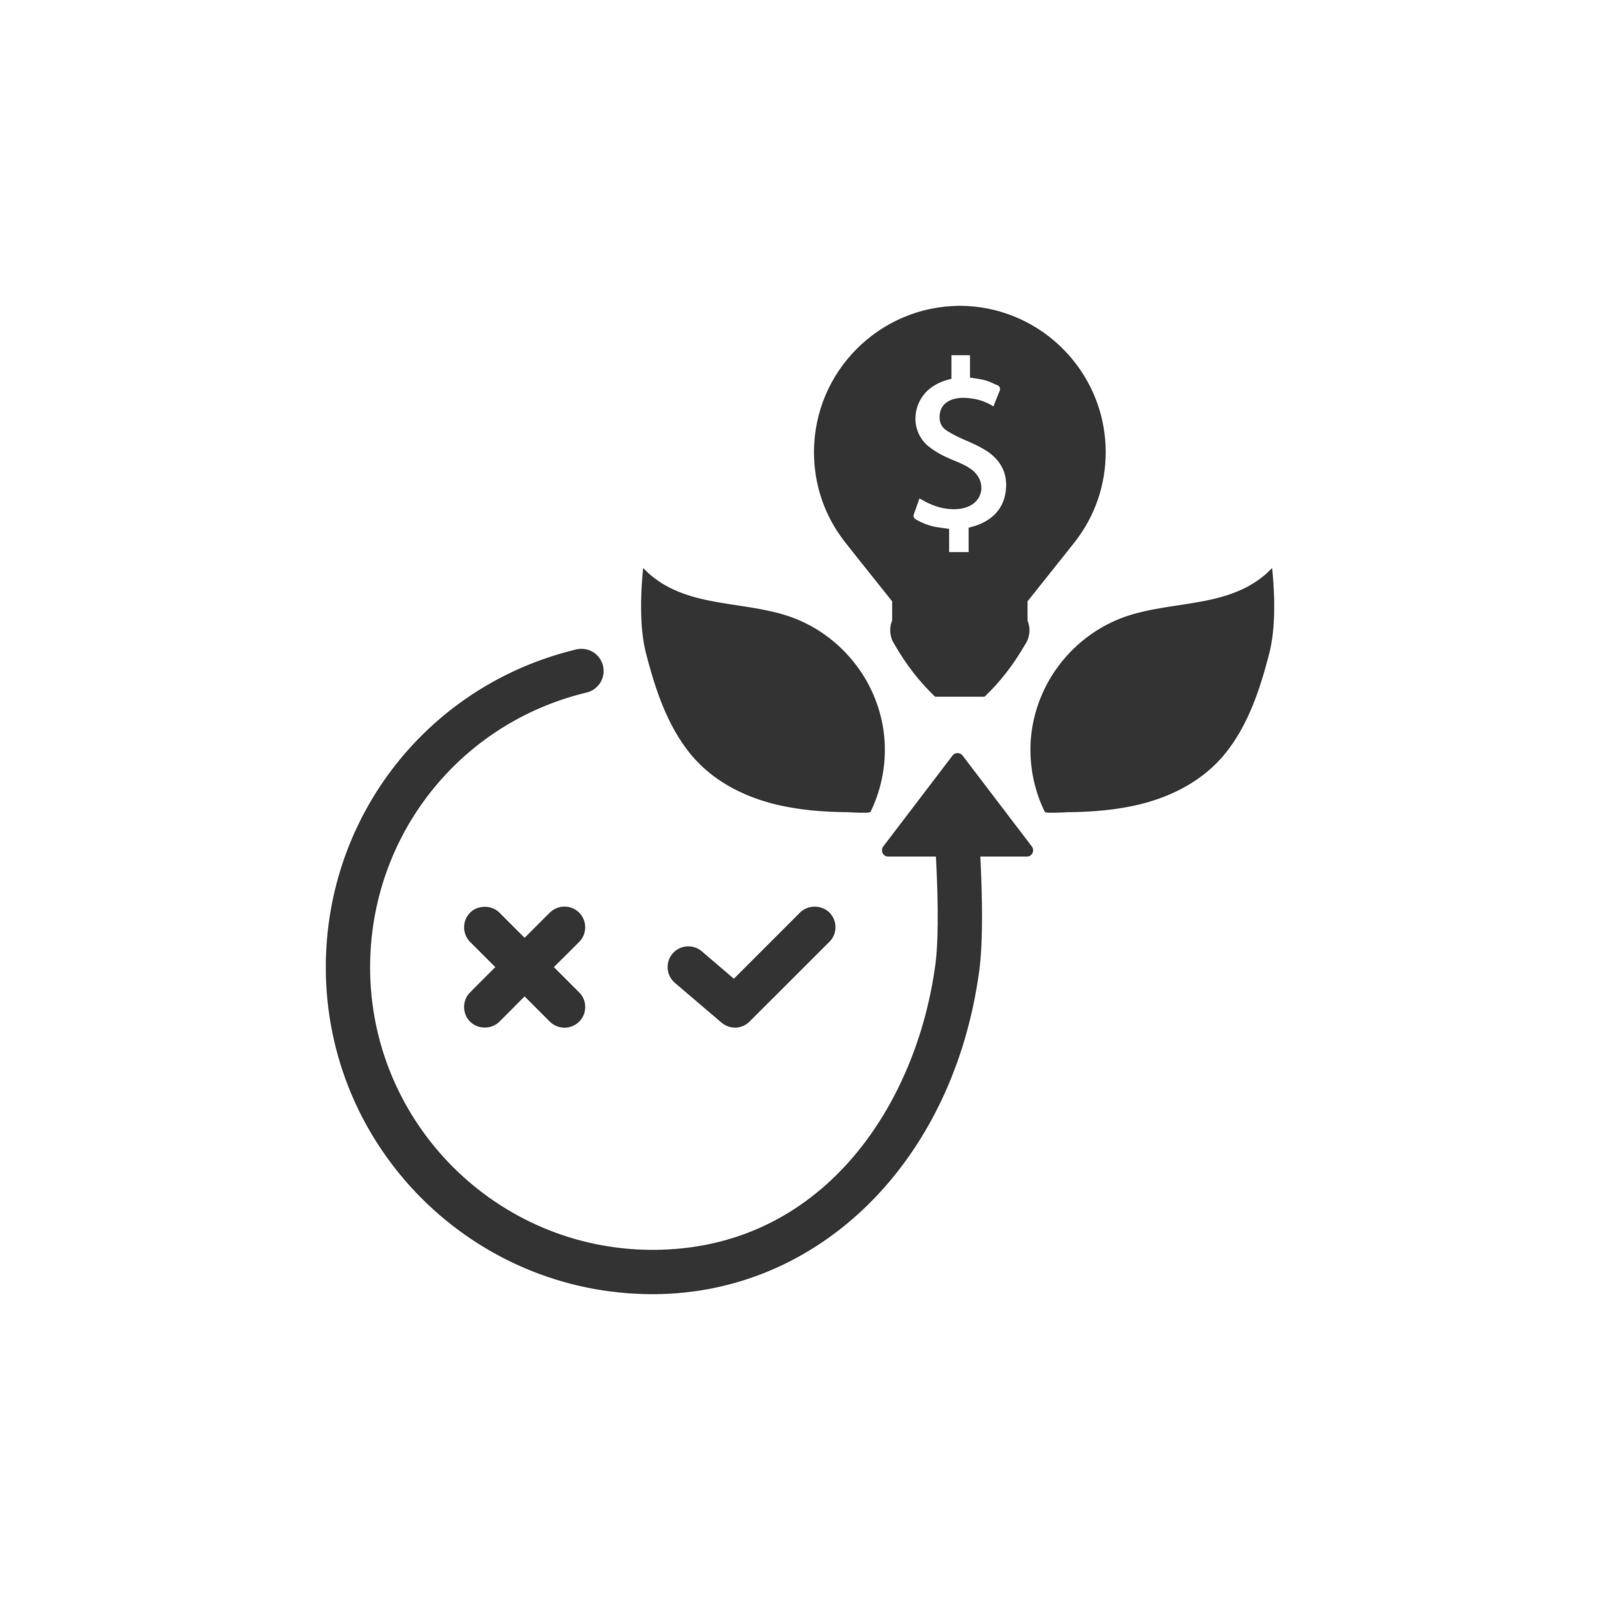 Creative money investment icon  by delwar018